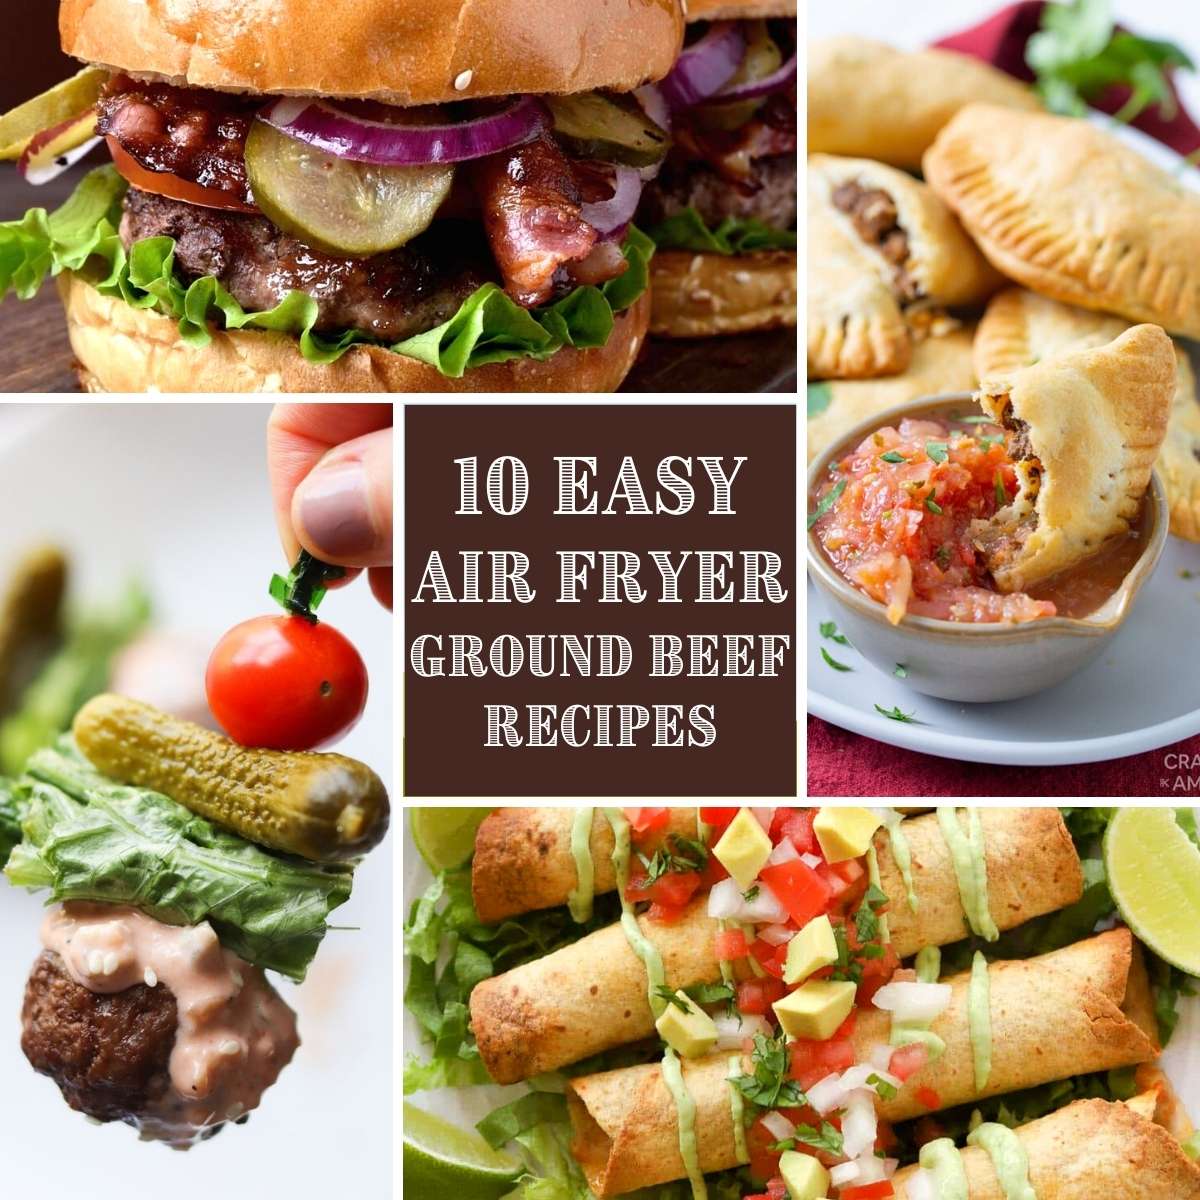 Easy Air Fryer Ground Beef Recipes - Amee's Savory Dish